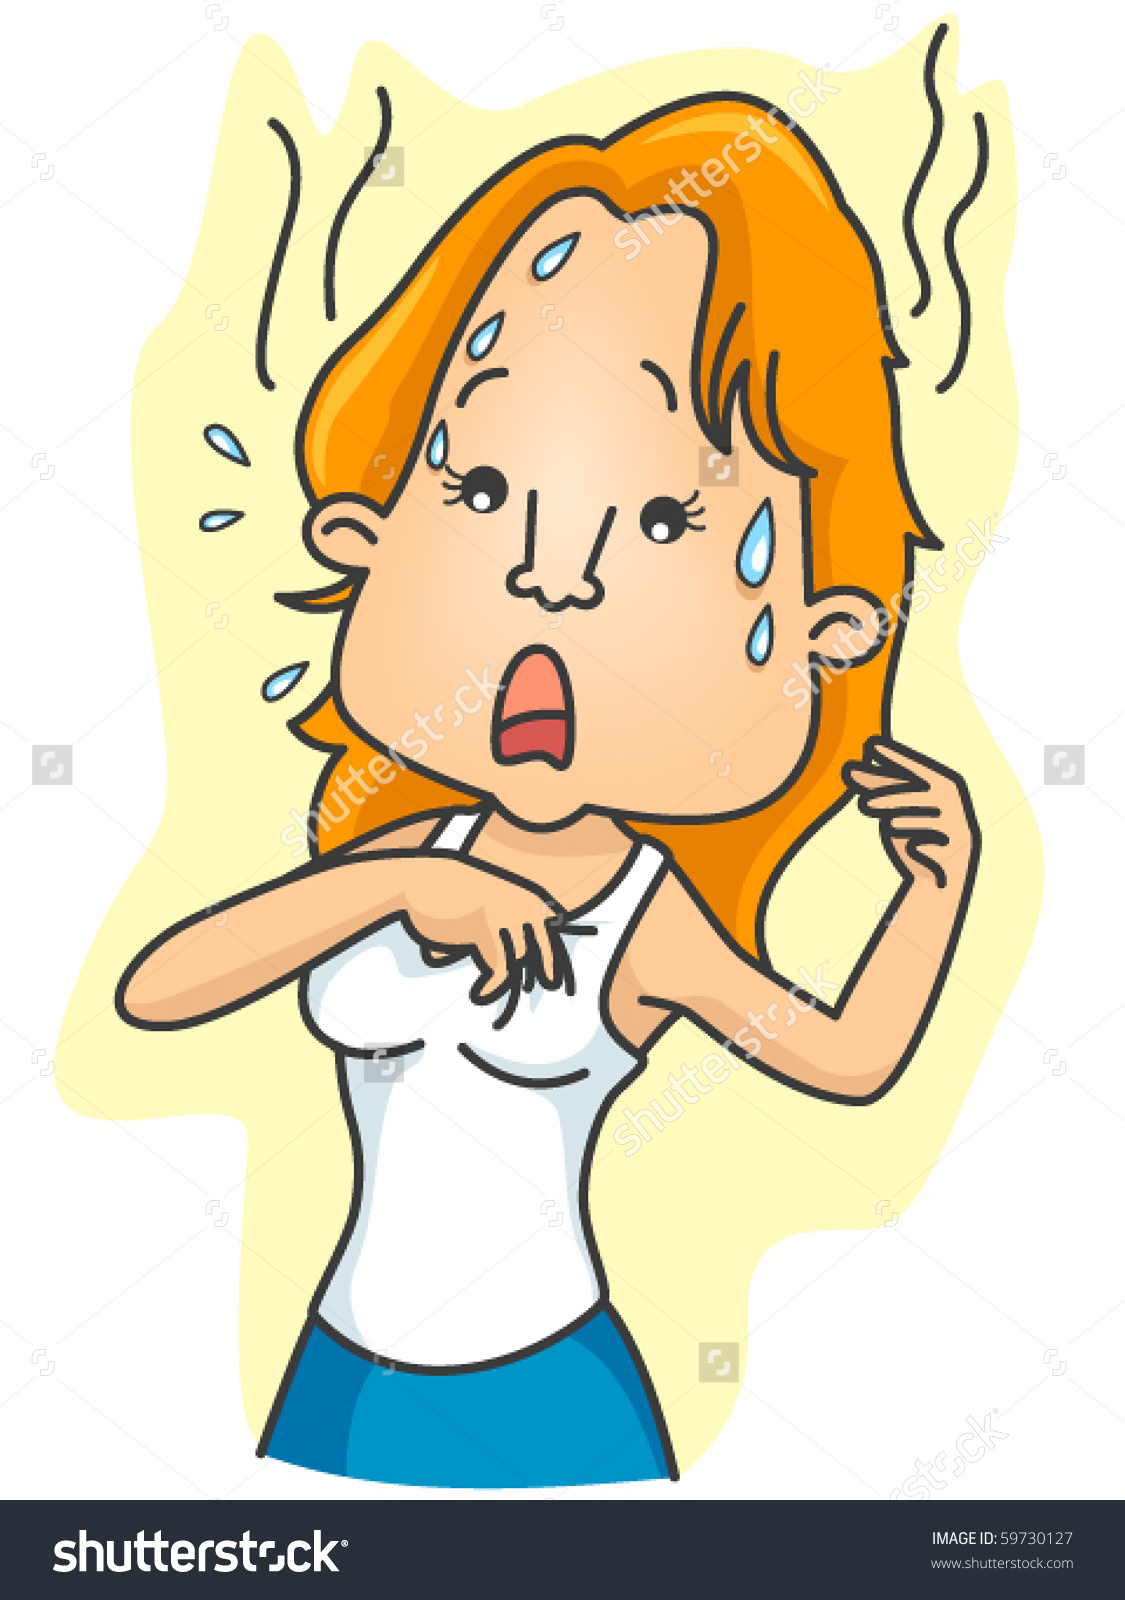 Woman sweating clipart.